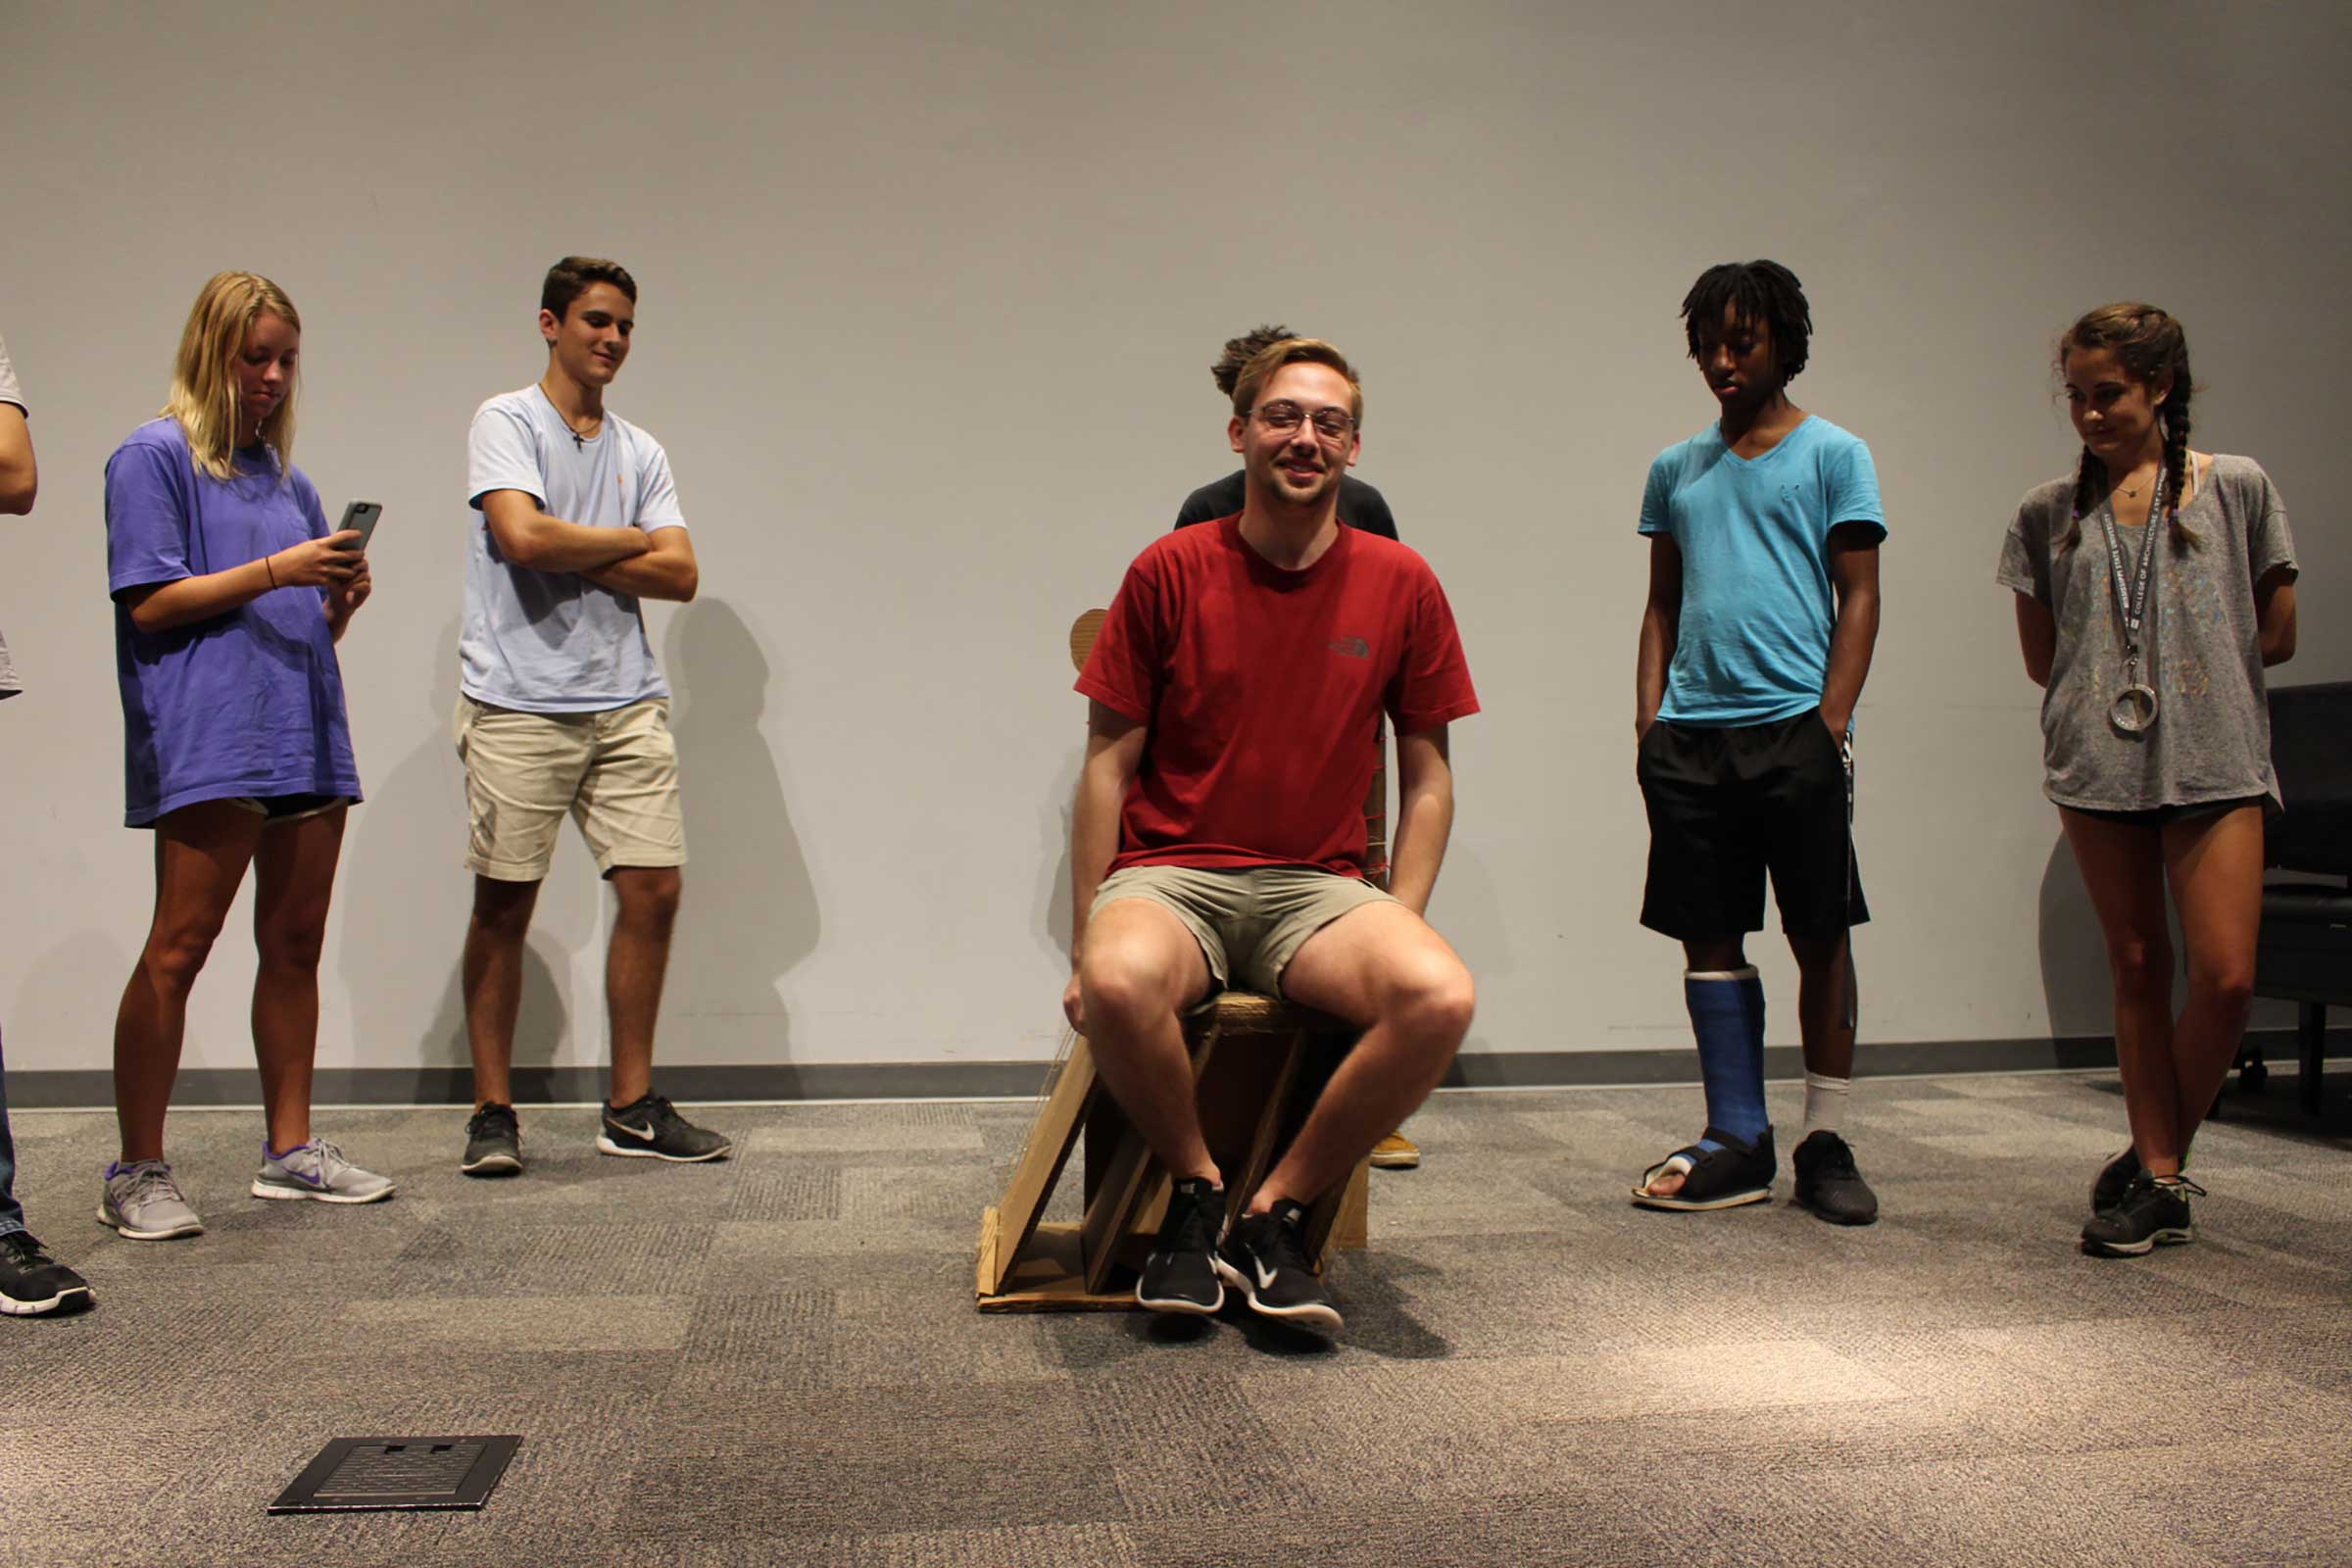 Day 4: Cardboard Sitting Device – Review 27